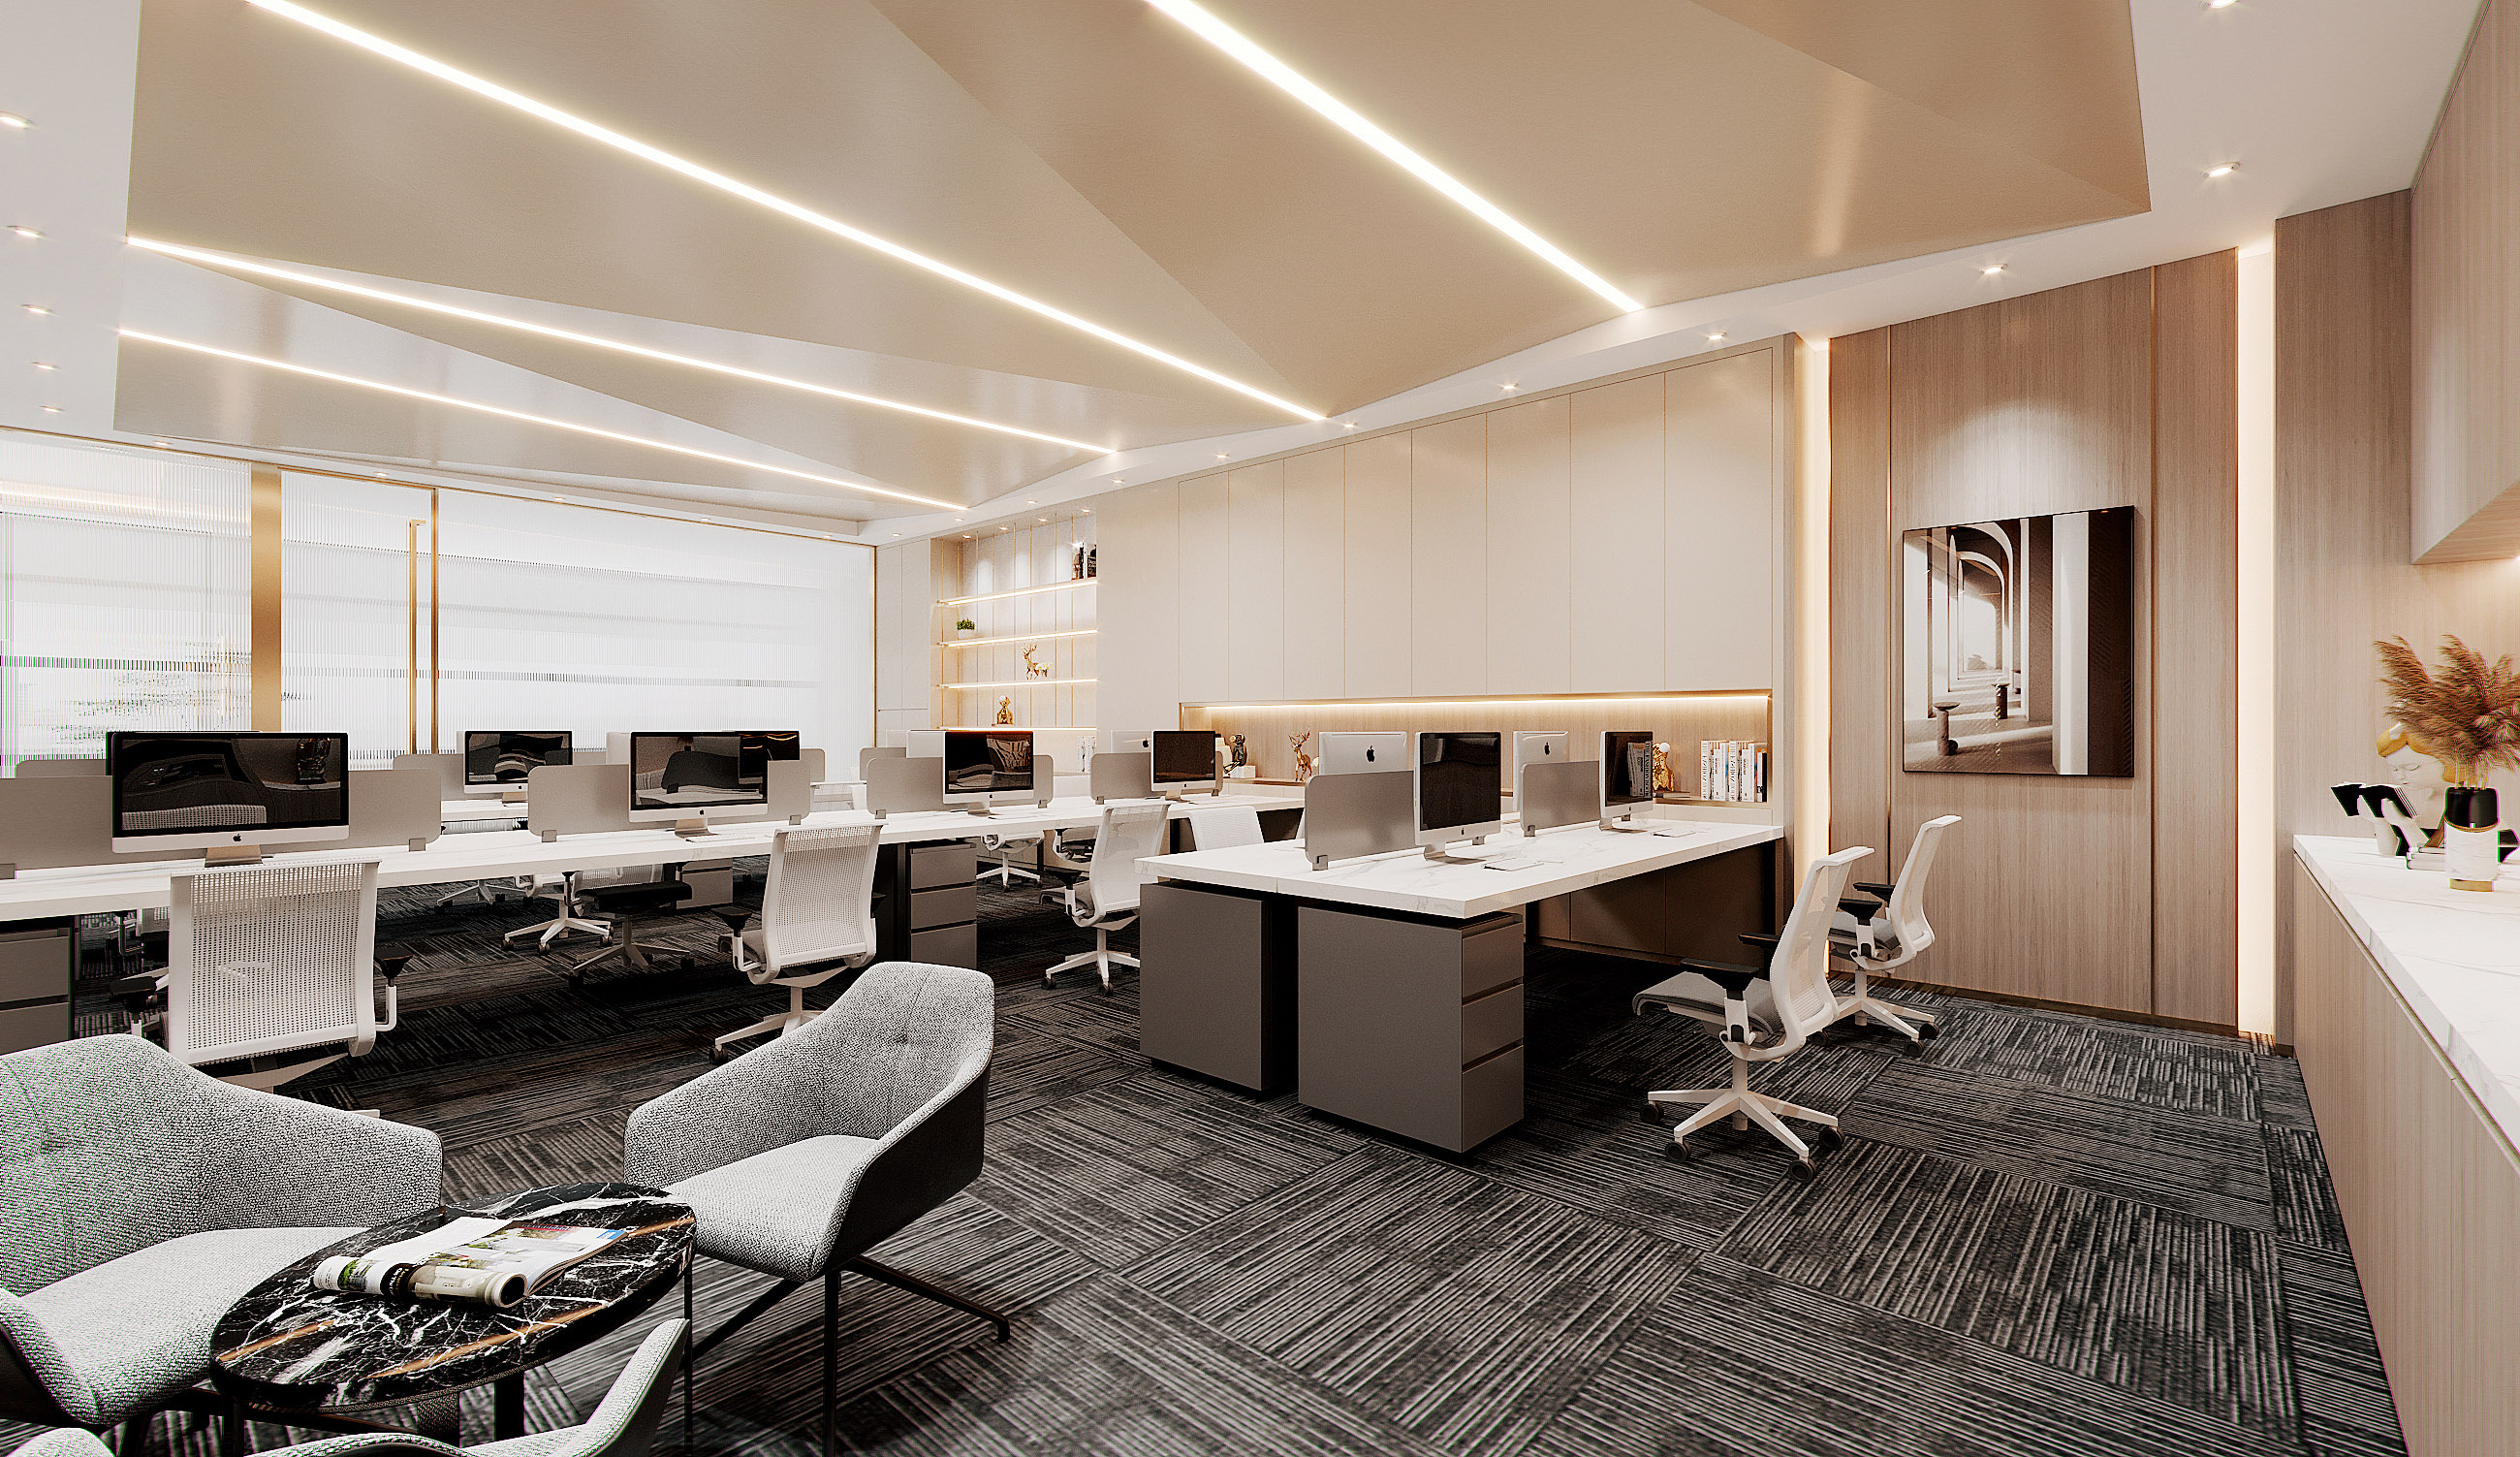 Reasonable placement of office furniture to make the office comfortable and pleasant